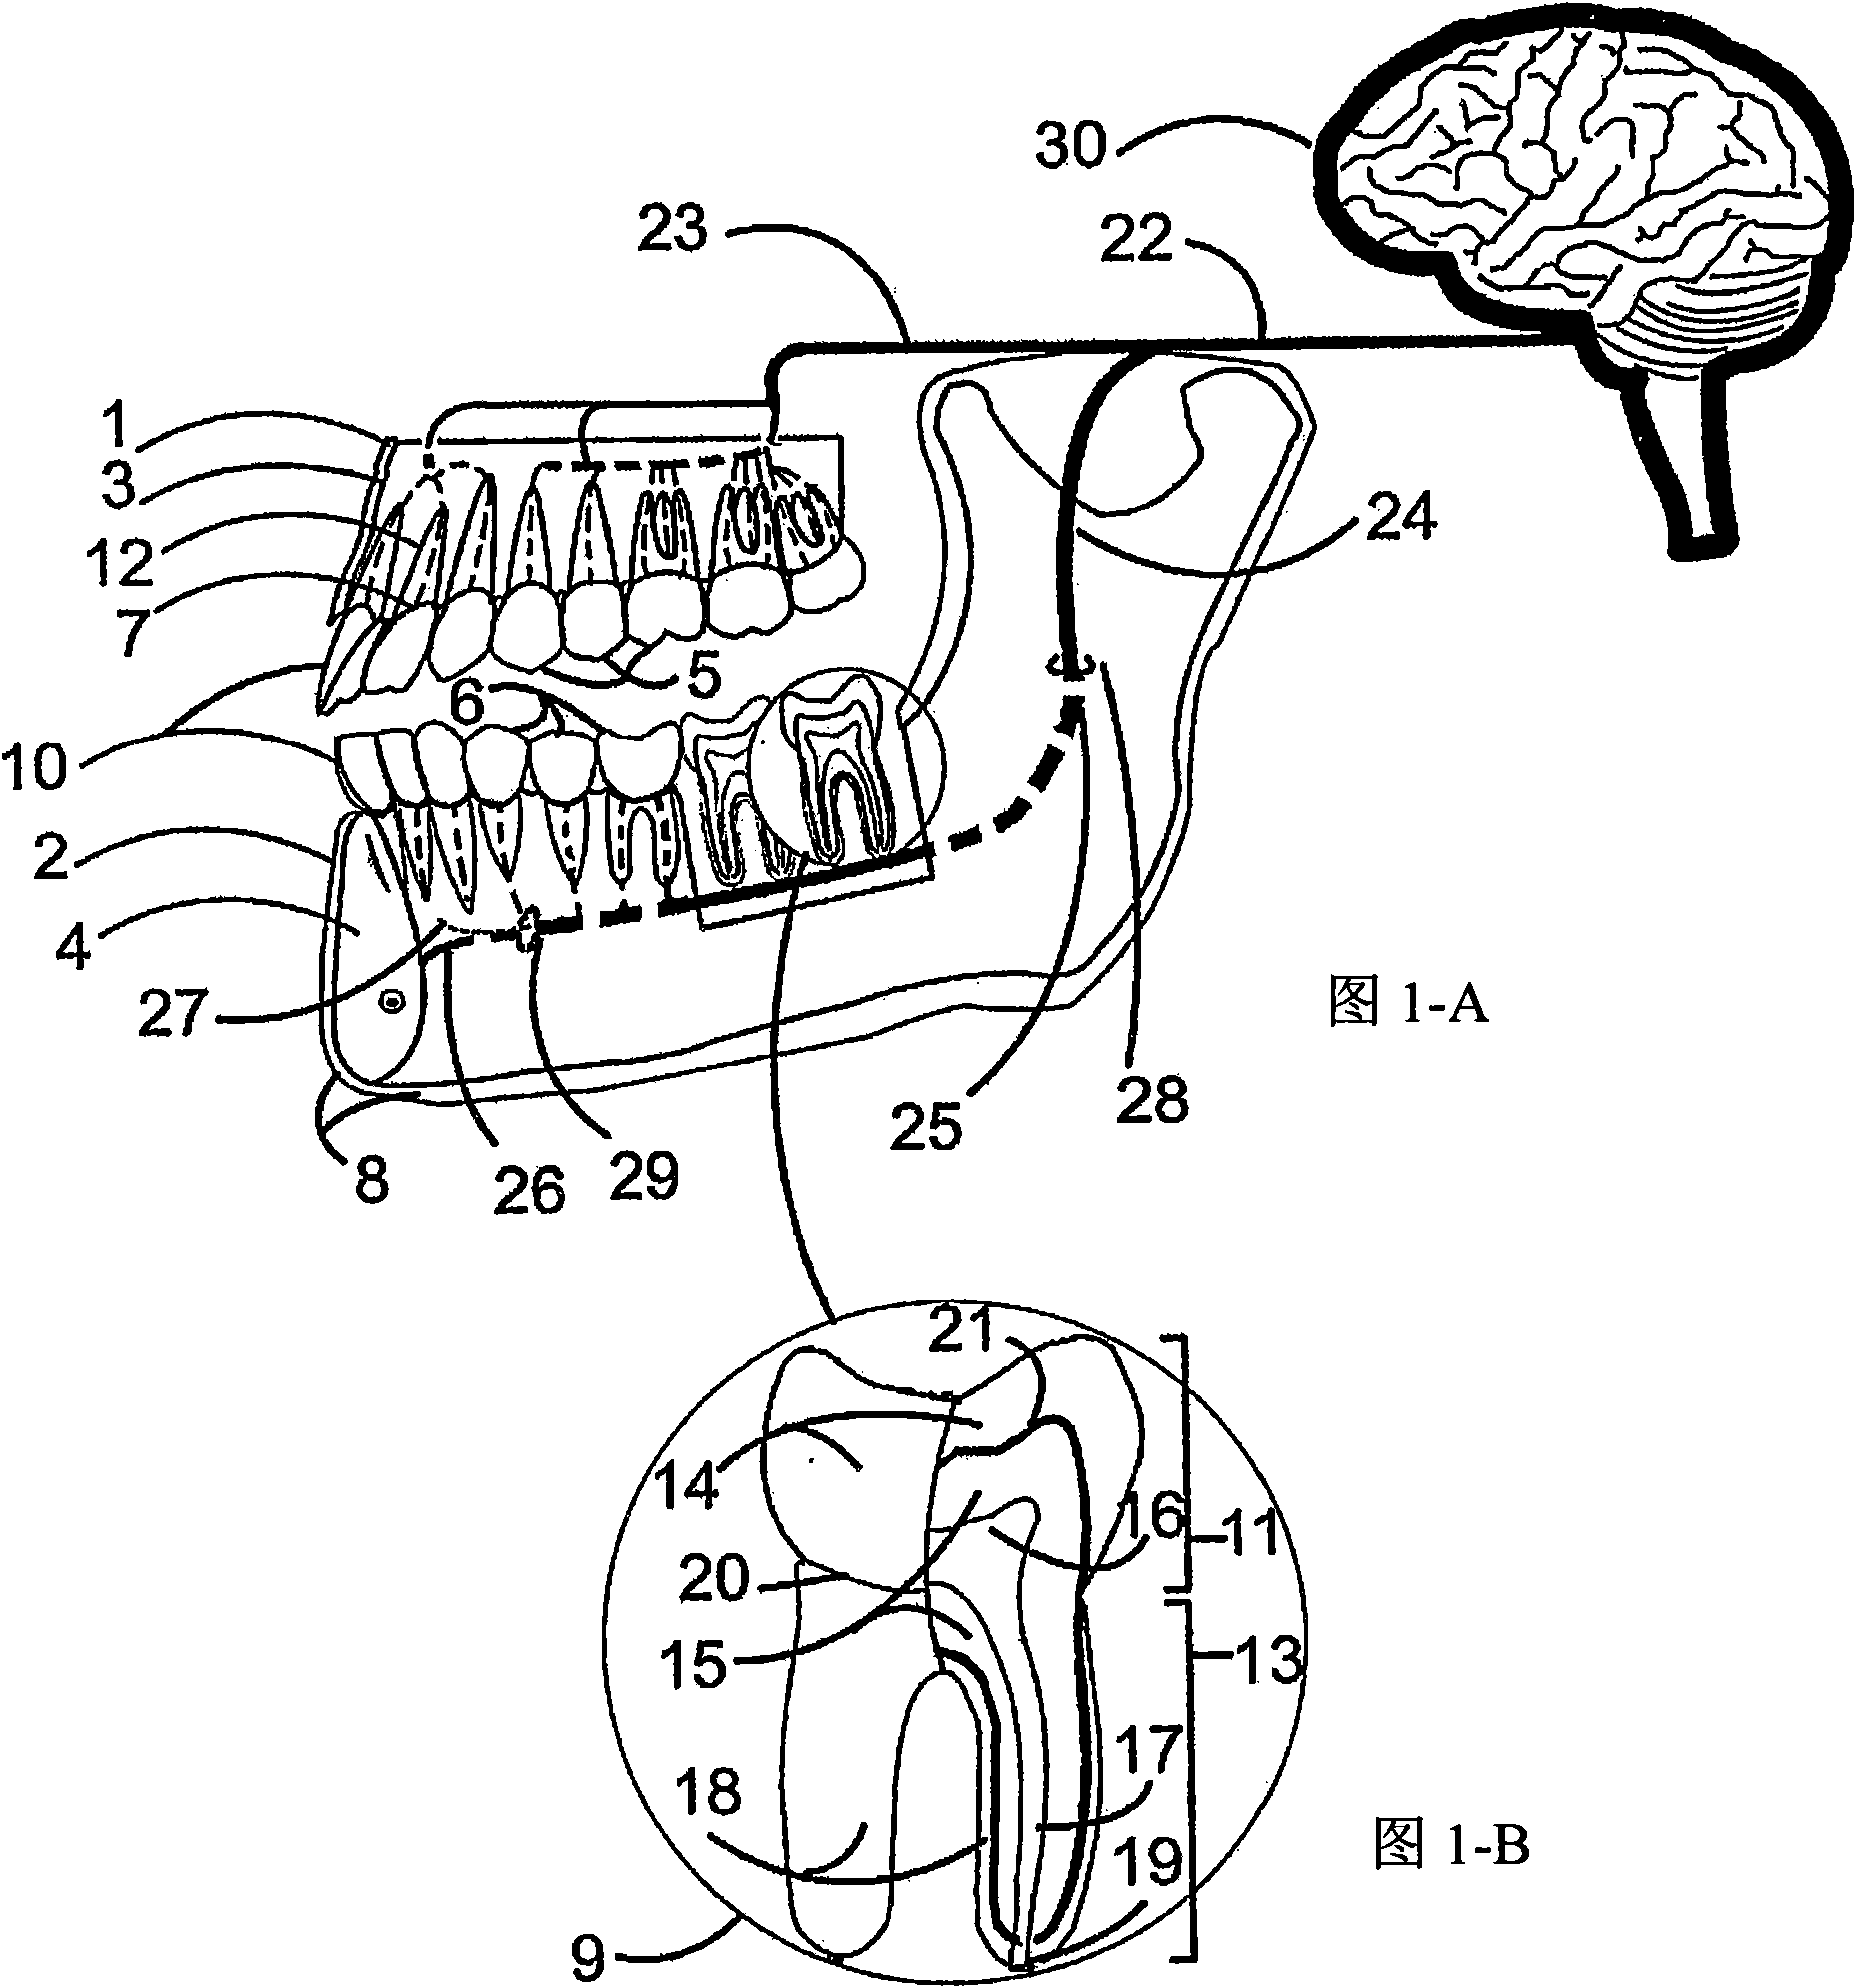 A method and a device for practicing dental treatments